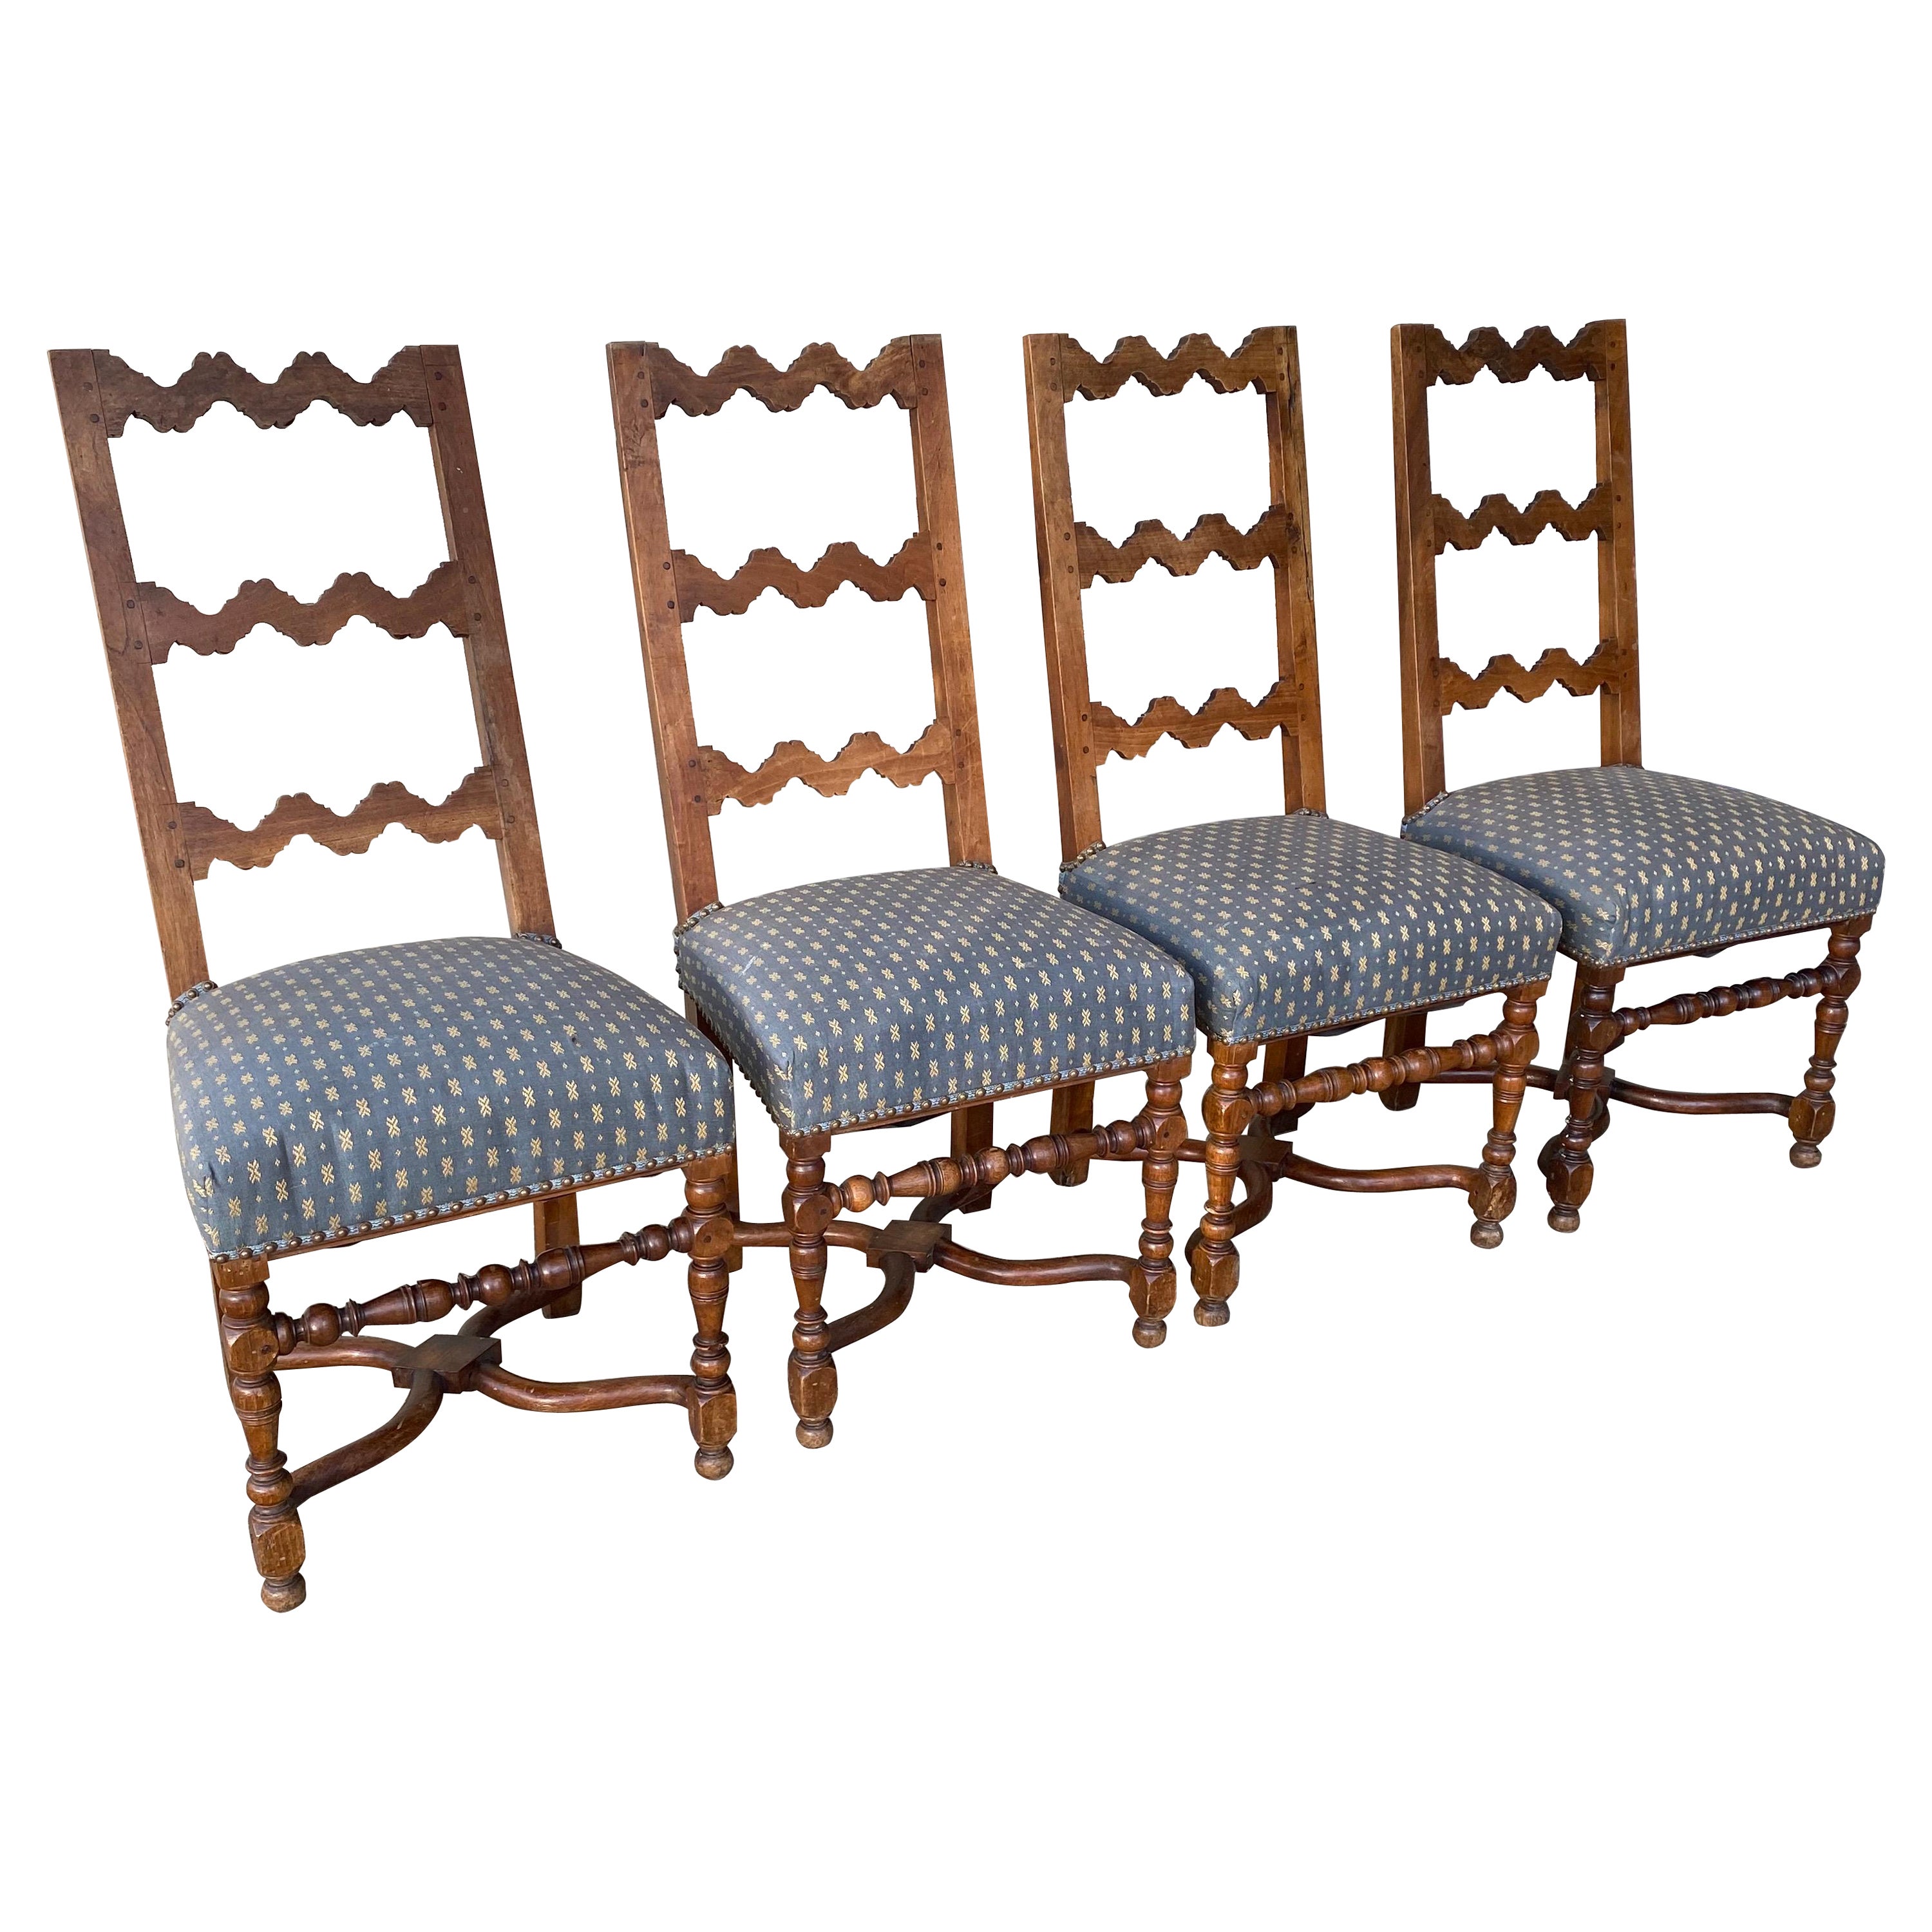 Set of Four Rustic Style Oak Ladder Back Chairs, Early 20th Century For Sale